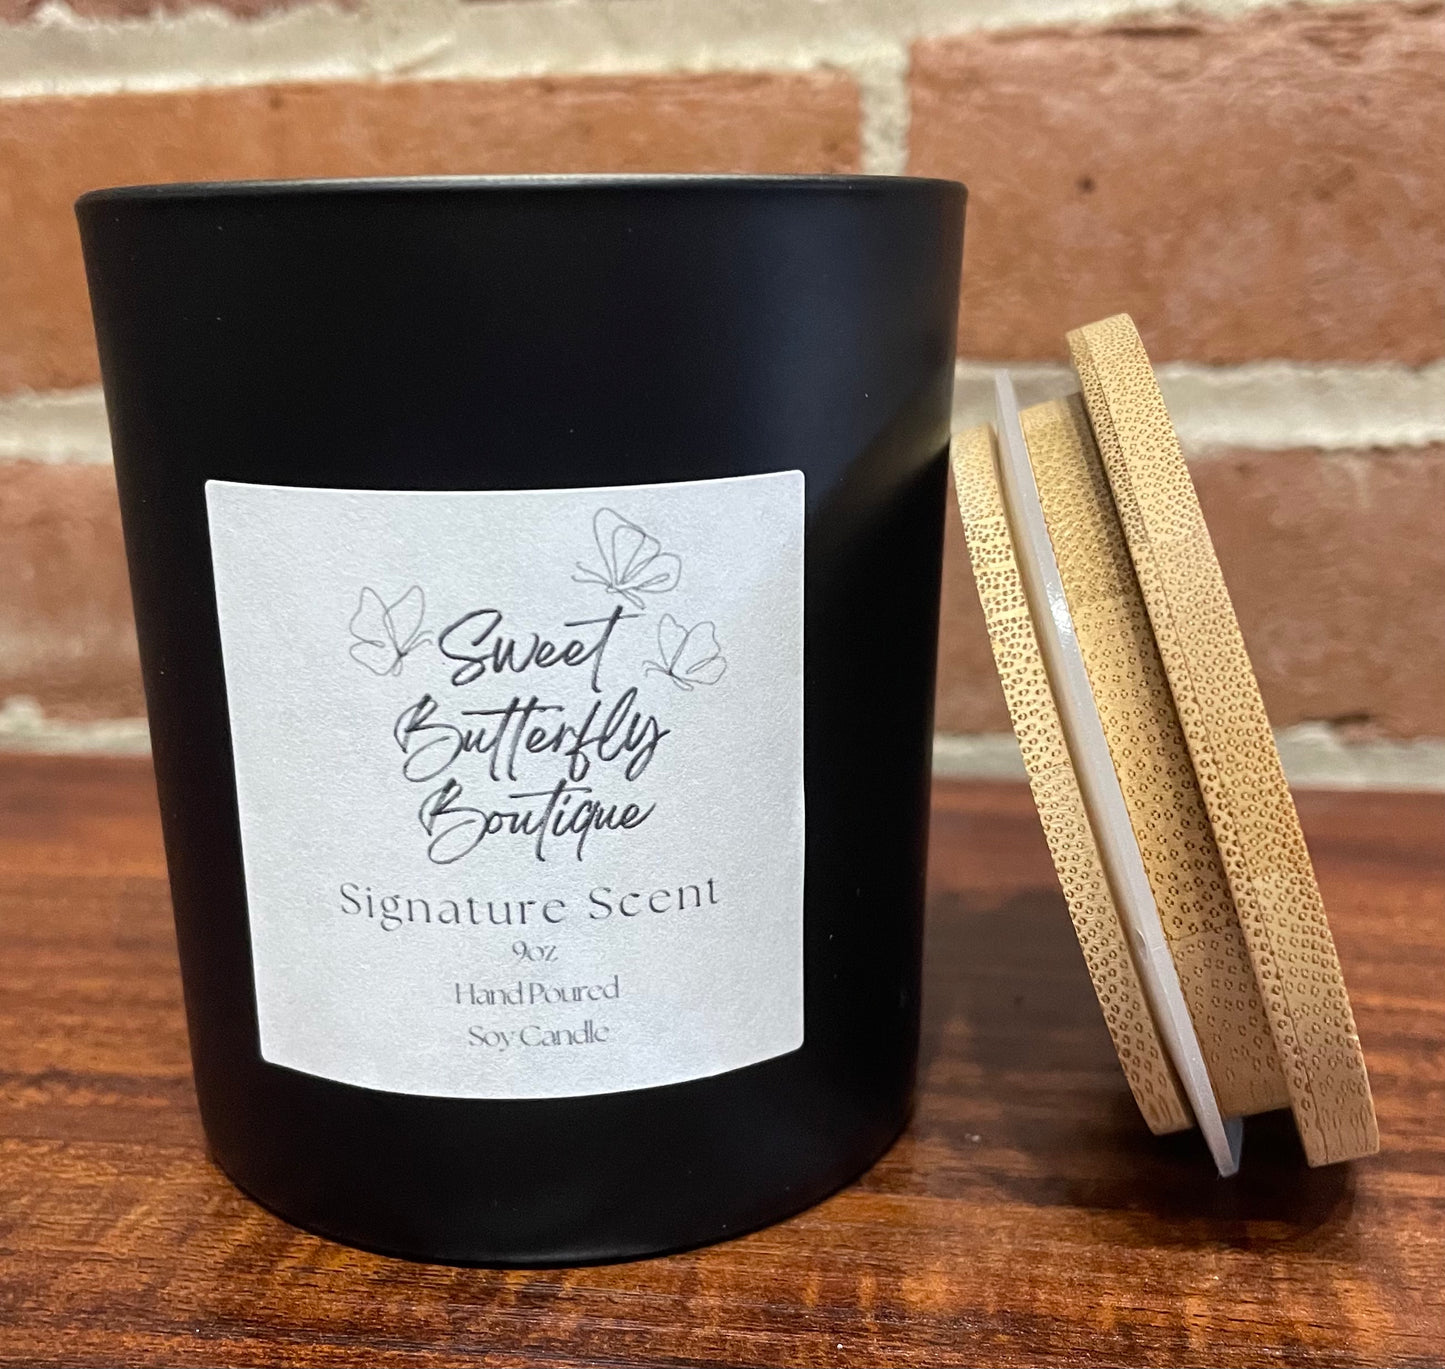 Sweet Butterfly Boutique’s Signature Candle Scent